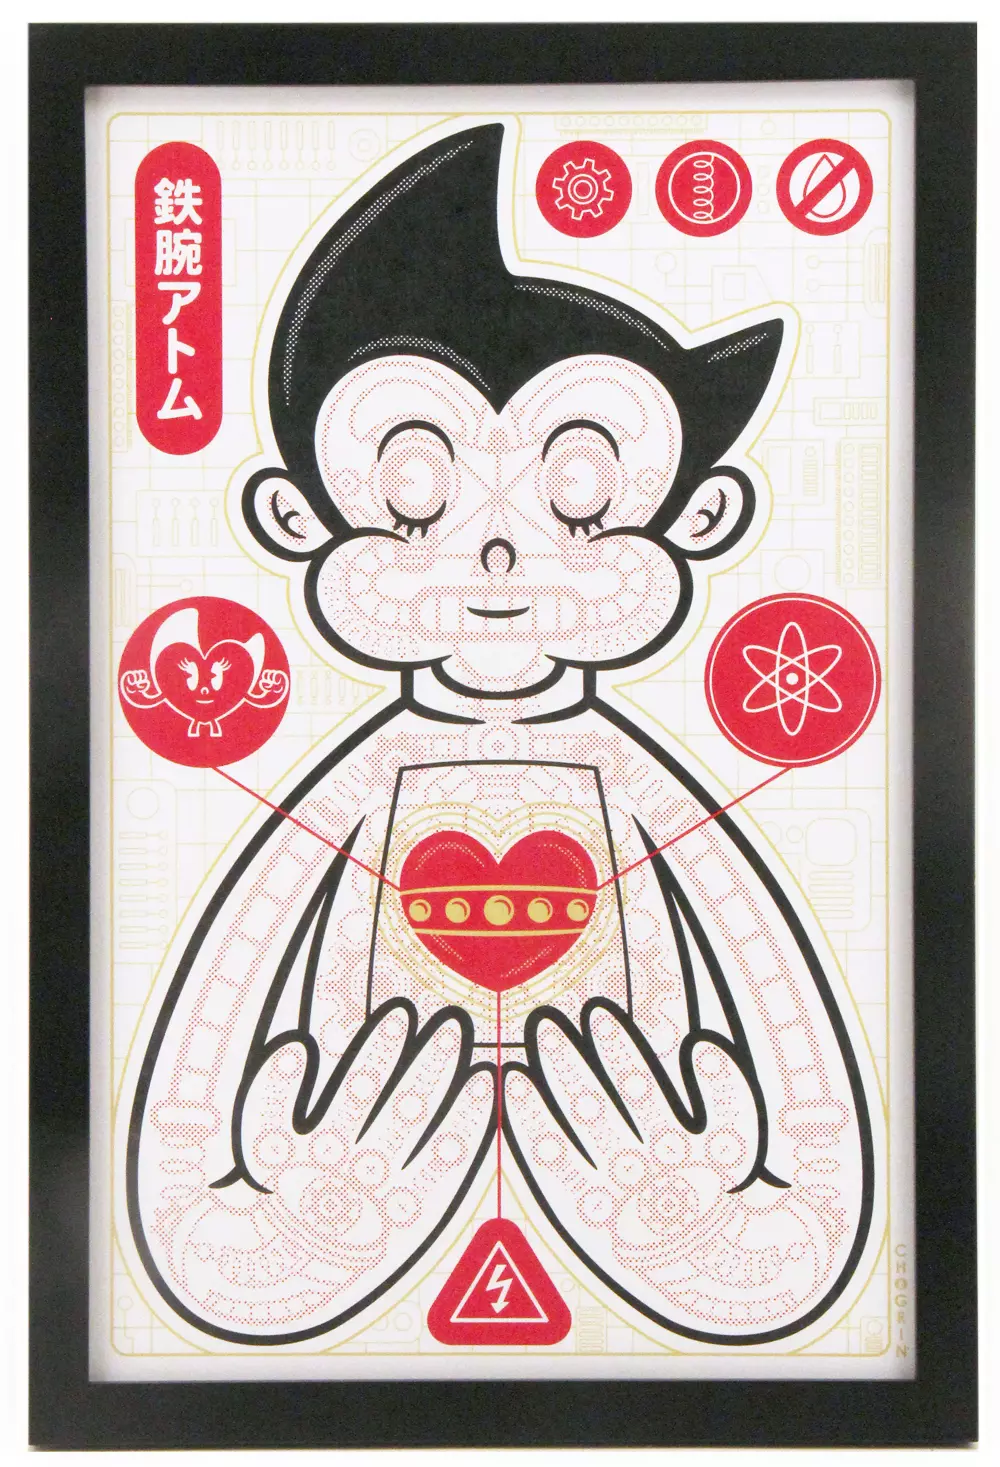 MIGHTY ATOM REDUX, CHOGRIN